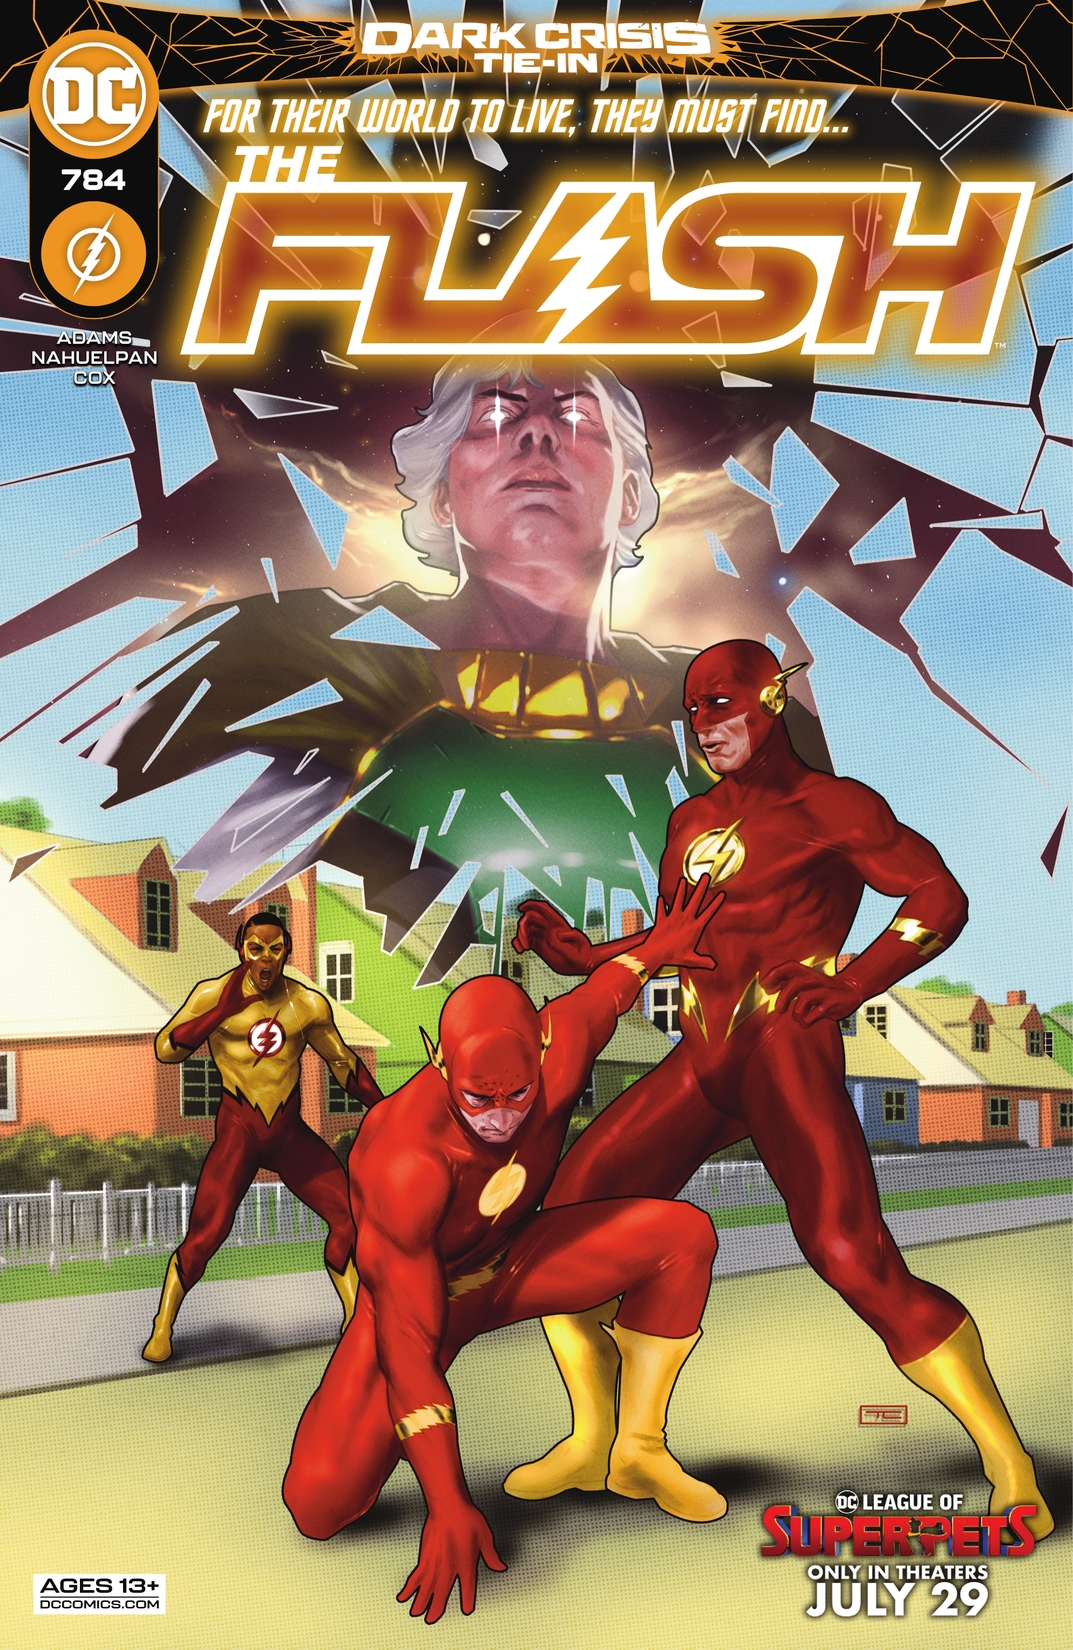 The Flash (2016-) #784 preview images